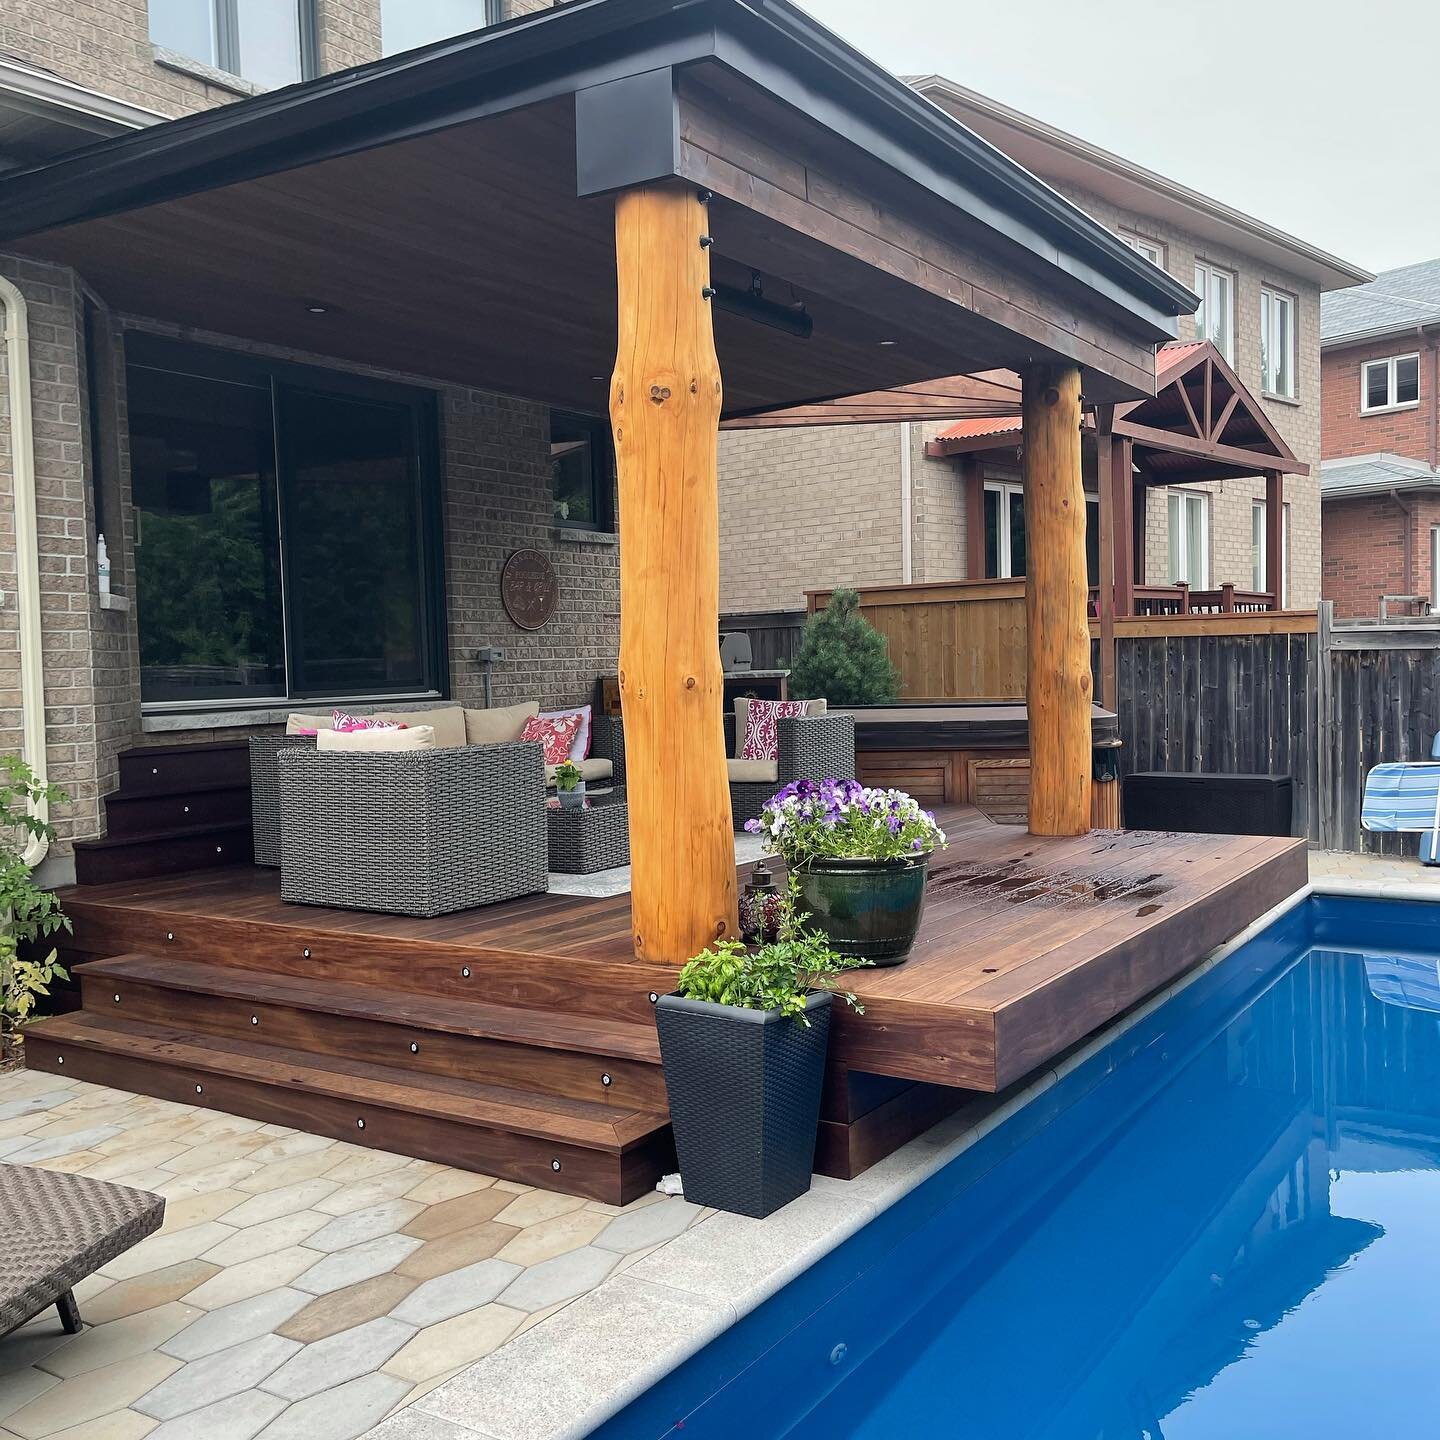 This job was completed last year by our team. It was surprisingly complicated for a job this size. The IPE deck cantilevers over then pool with under mount lighting. We used hand peeled pine logs to support the roof system that was cladded in pine t&